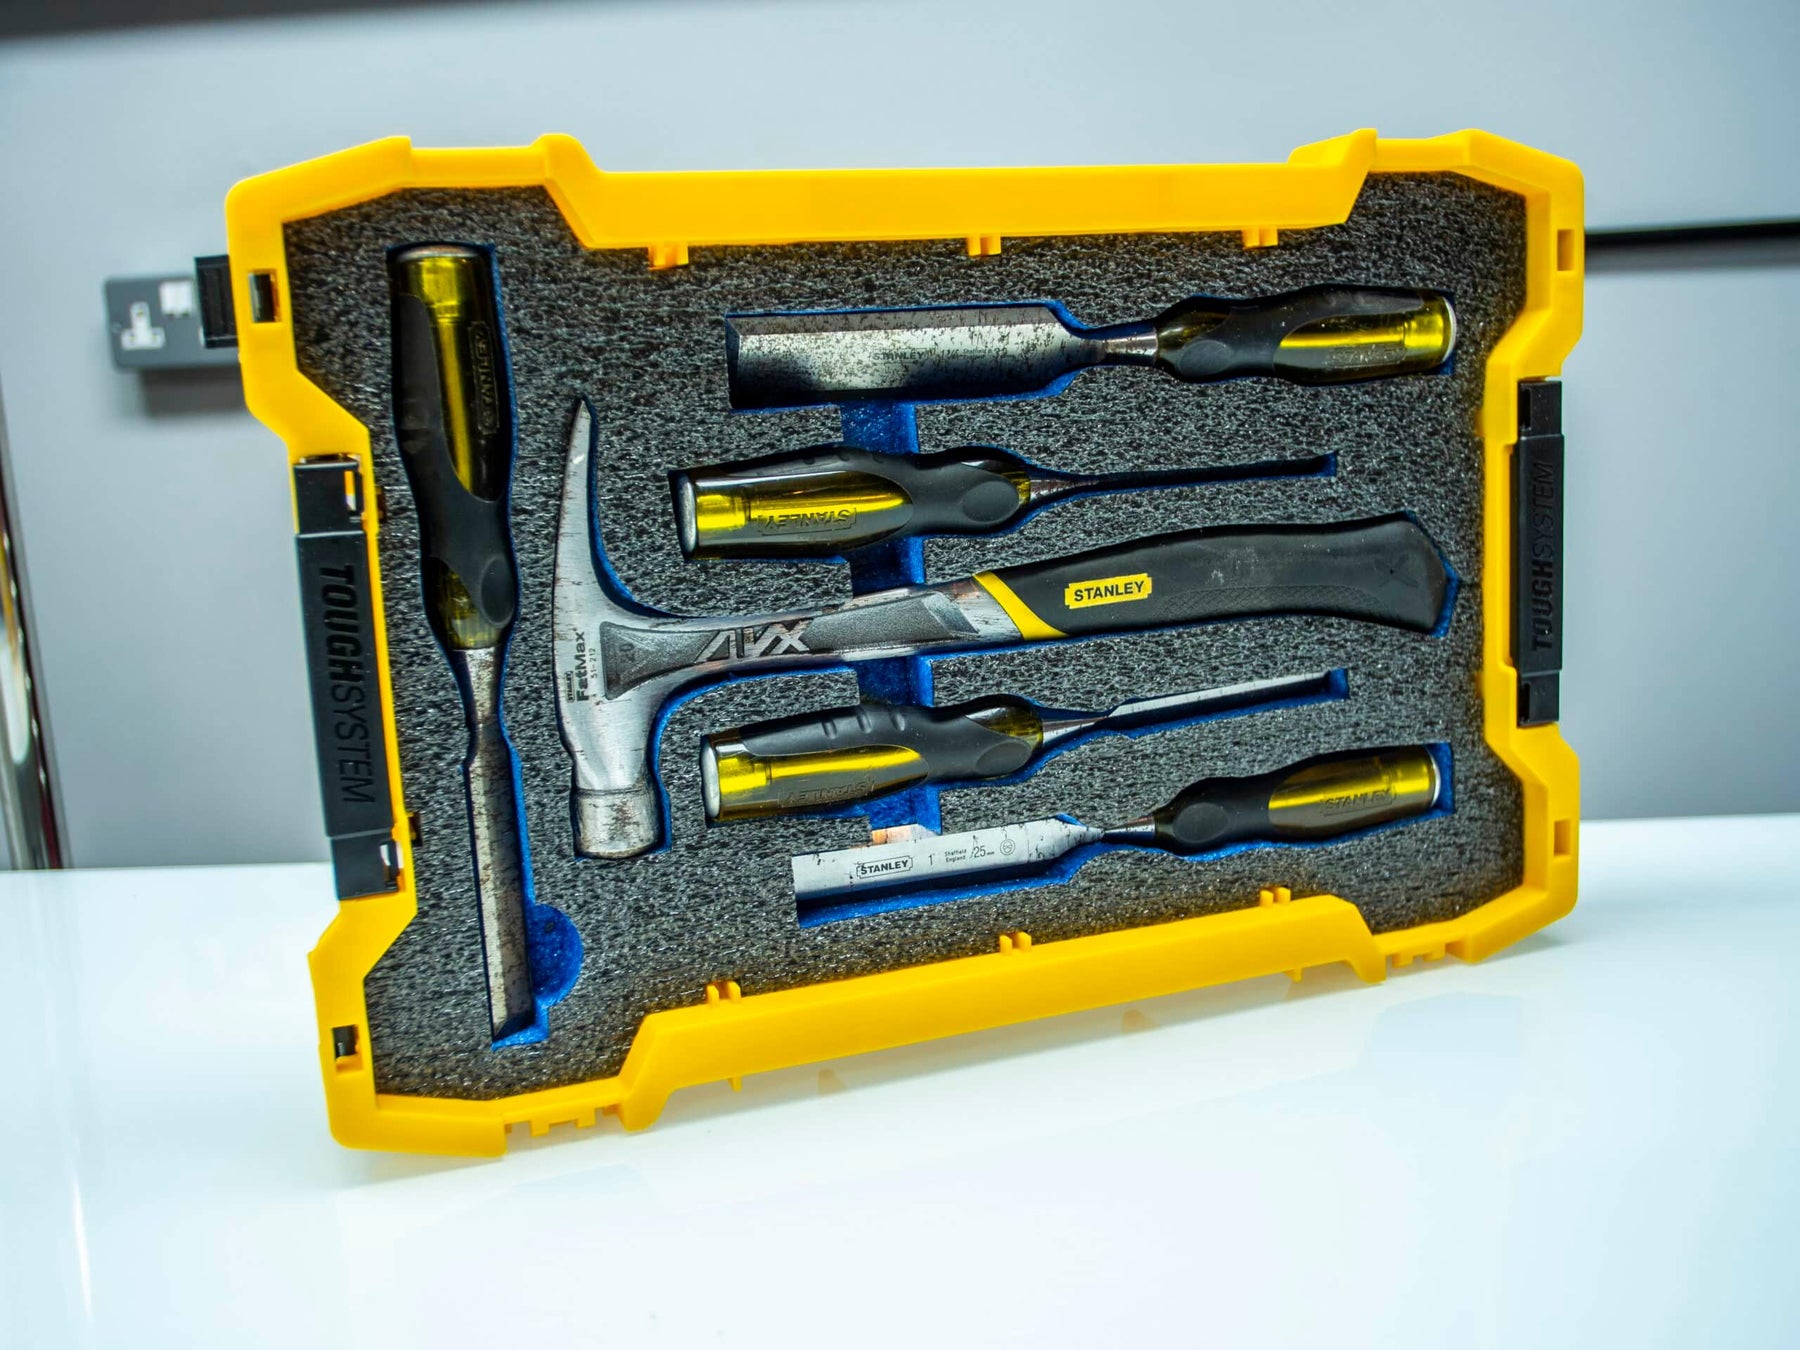 Get the most from your Dewalt Toughsystem 2.0 trays - Shadow Foam